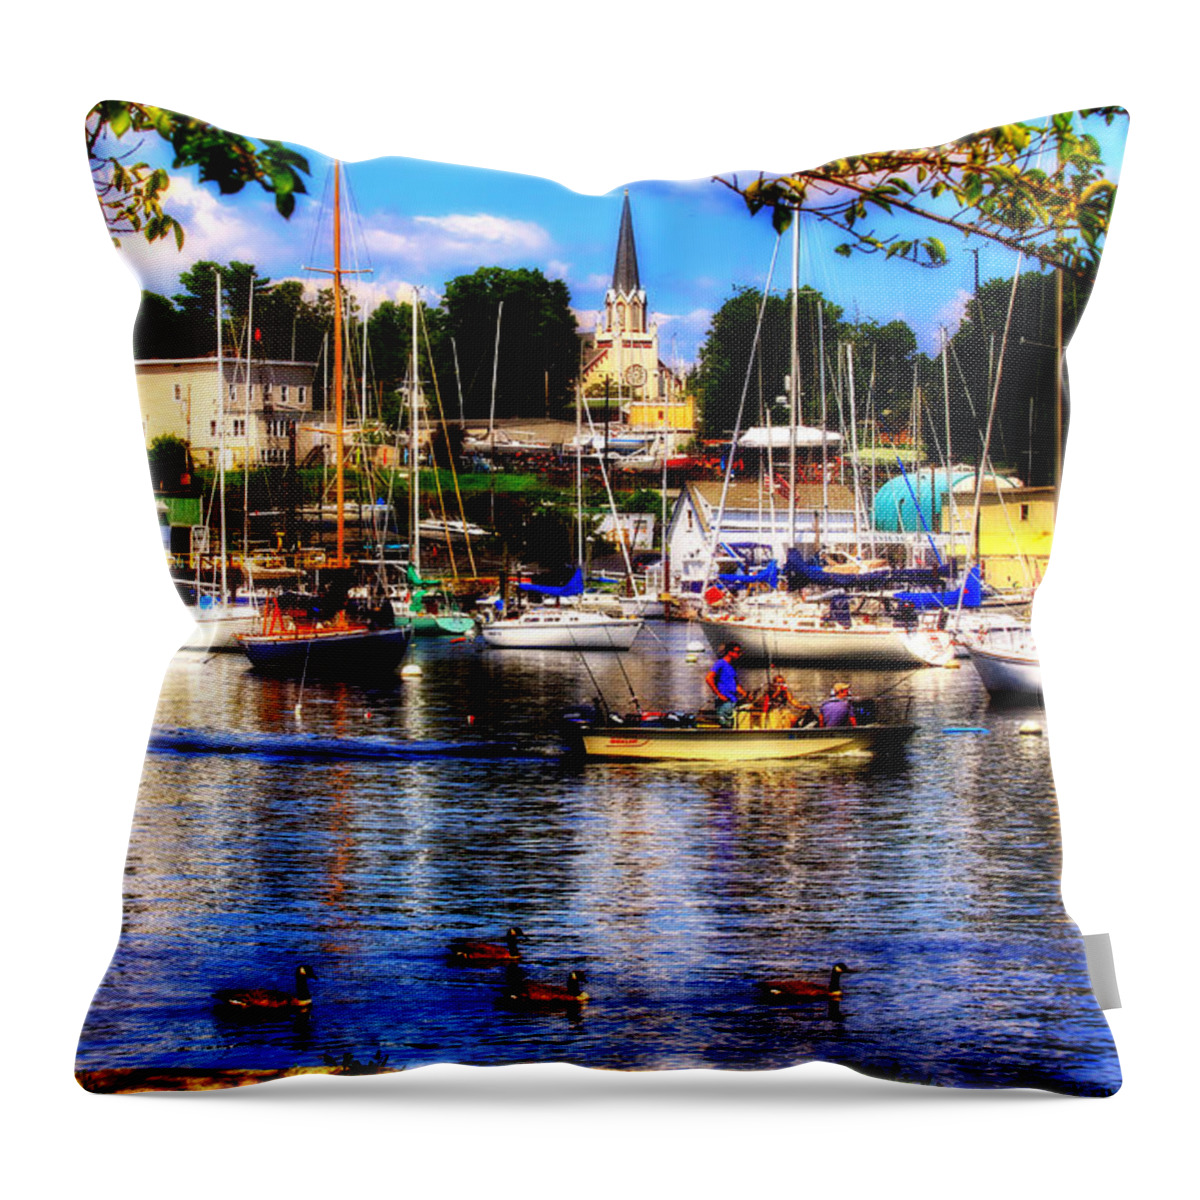 Mamaroneck Throw Pillow featuring the photograph Summertime On The Harbor by Aurelio Zucco